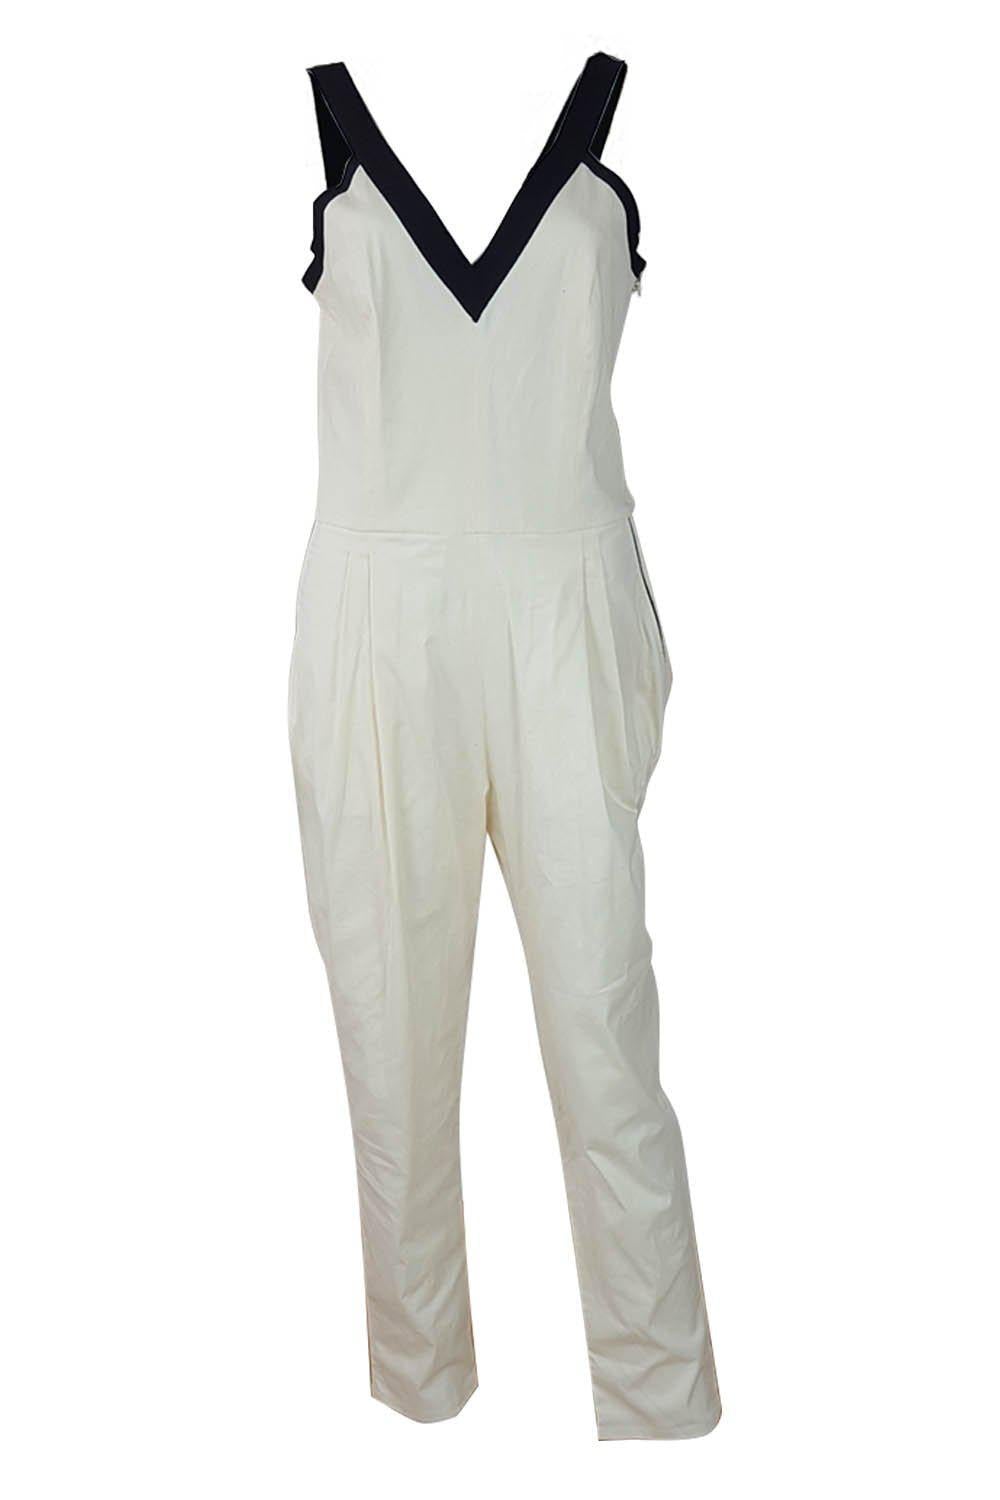 BAND OF OUTSIDERS Ivory Jumpsuit With Contrast Straps UK 6 / 8-Band of Outsiders-The Freperie